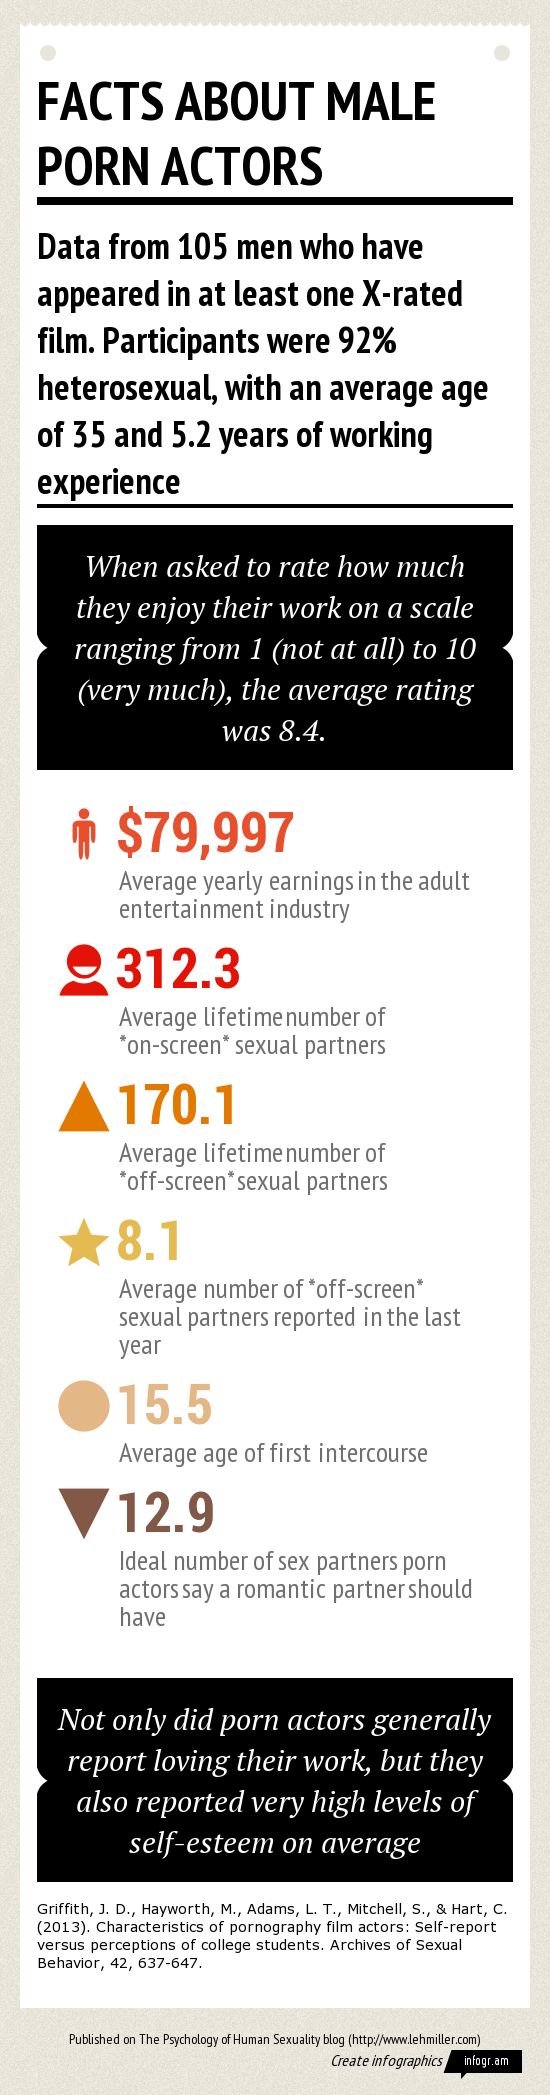 Facts About Male Porn Stars (Infographic) - Sex and Psychology